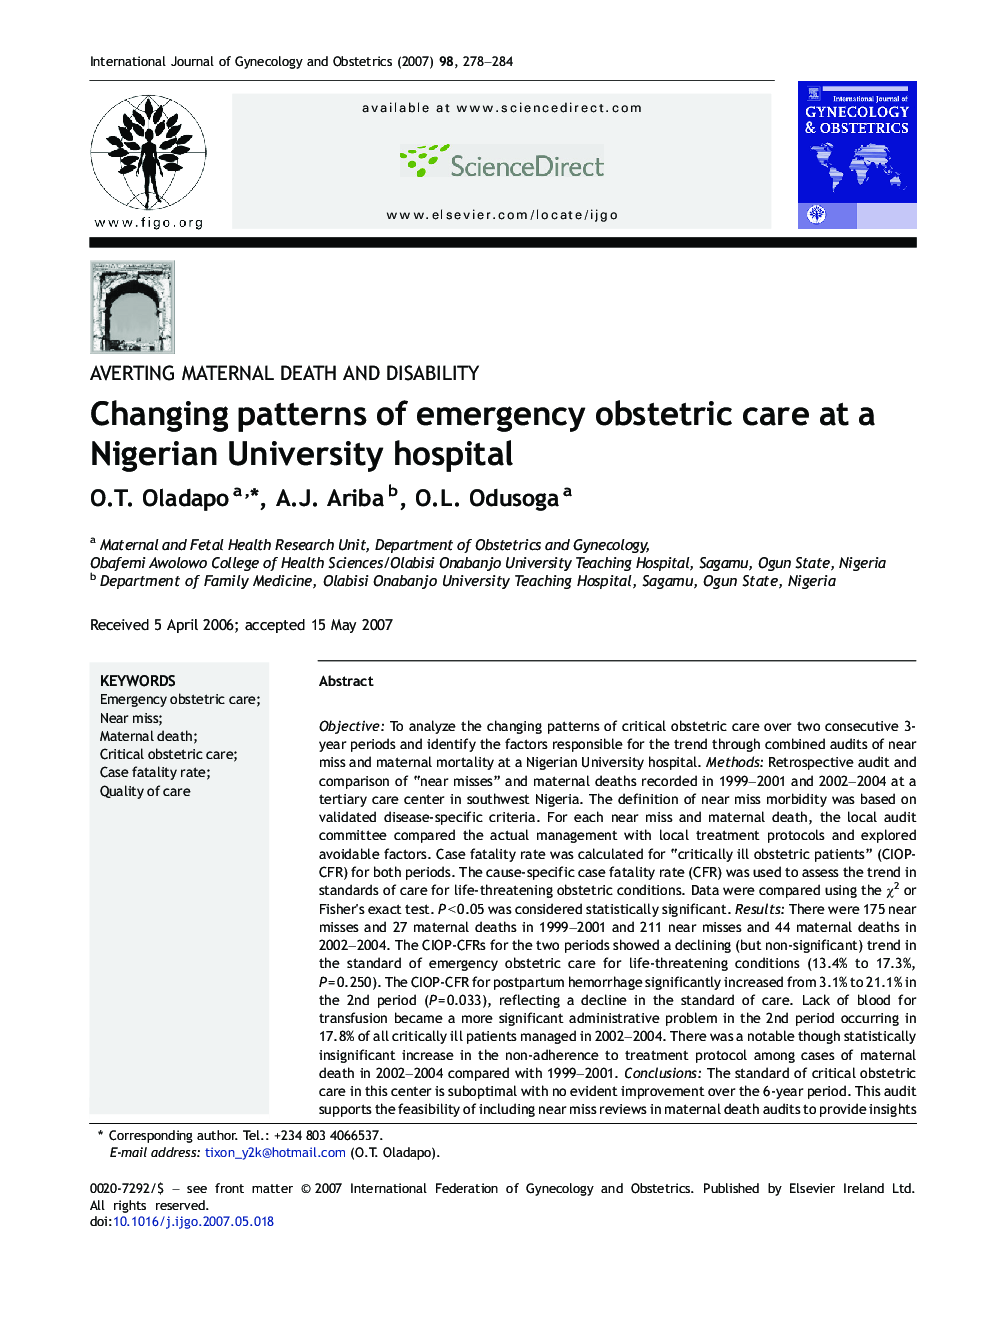 Changing patterns of emergency obstetric care at a Nigerian University hospital